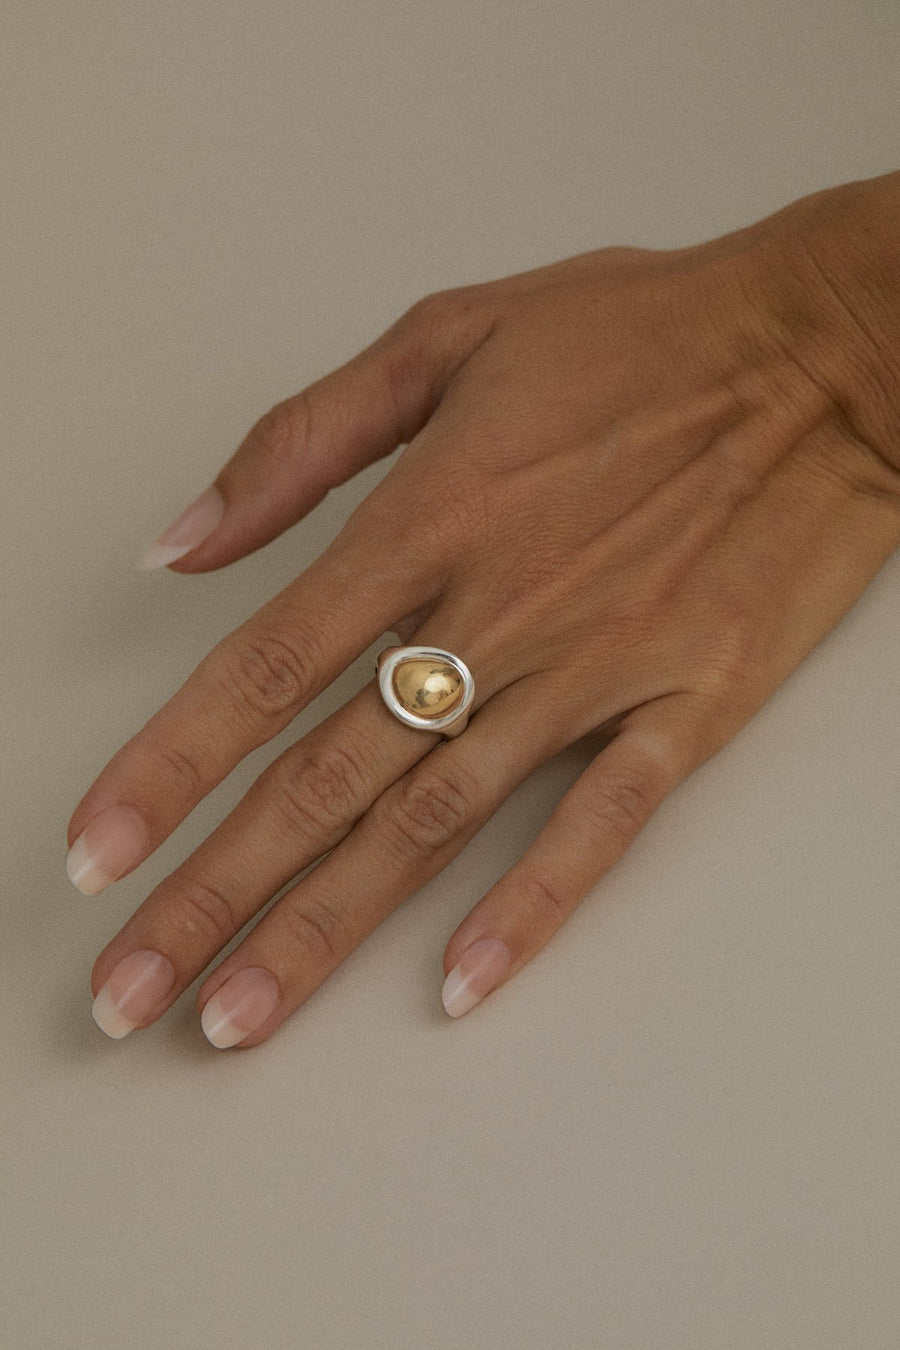 Hernan Herdez- Jewellery-jewelry-Jeryco Store- London- rings-rings for him-rings for her-unisex rings- 10 karat gold ring- solid gold ring- wedding ring for him-wedding ring for her-70s rings-sterling silver ring with gold dome- gold dome ring-Domo ring